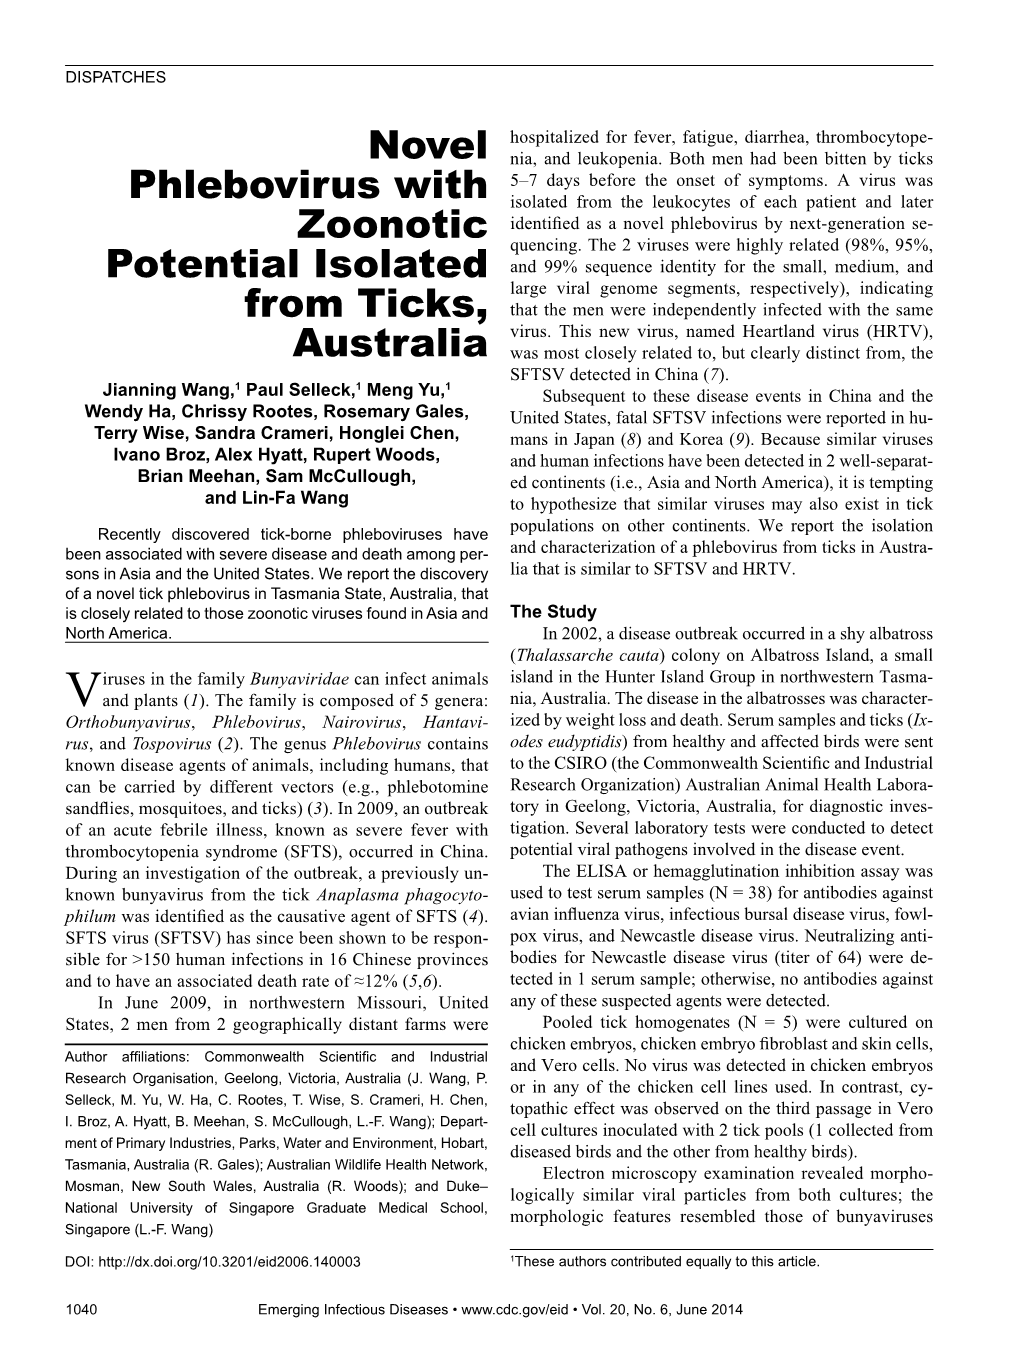 Novel Phlebovirus with Zoonotic Potential Isolated from Ticks, Australia